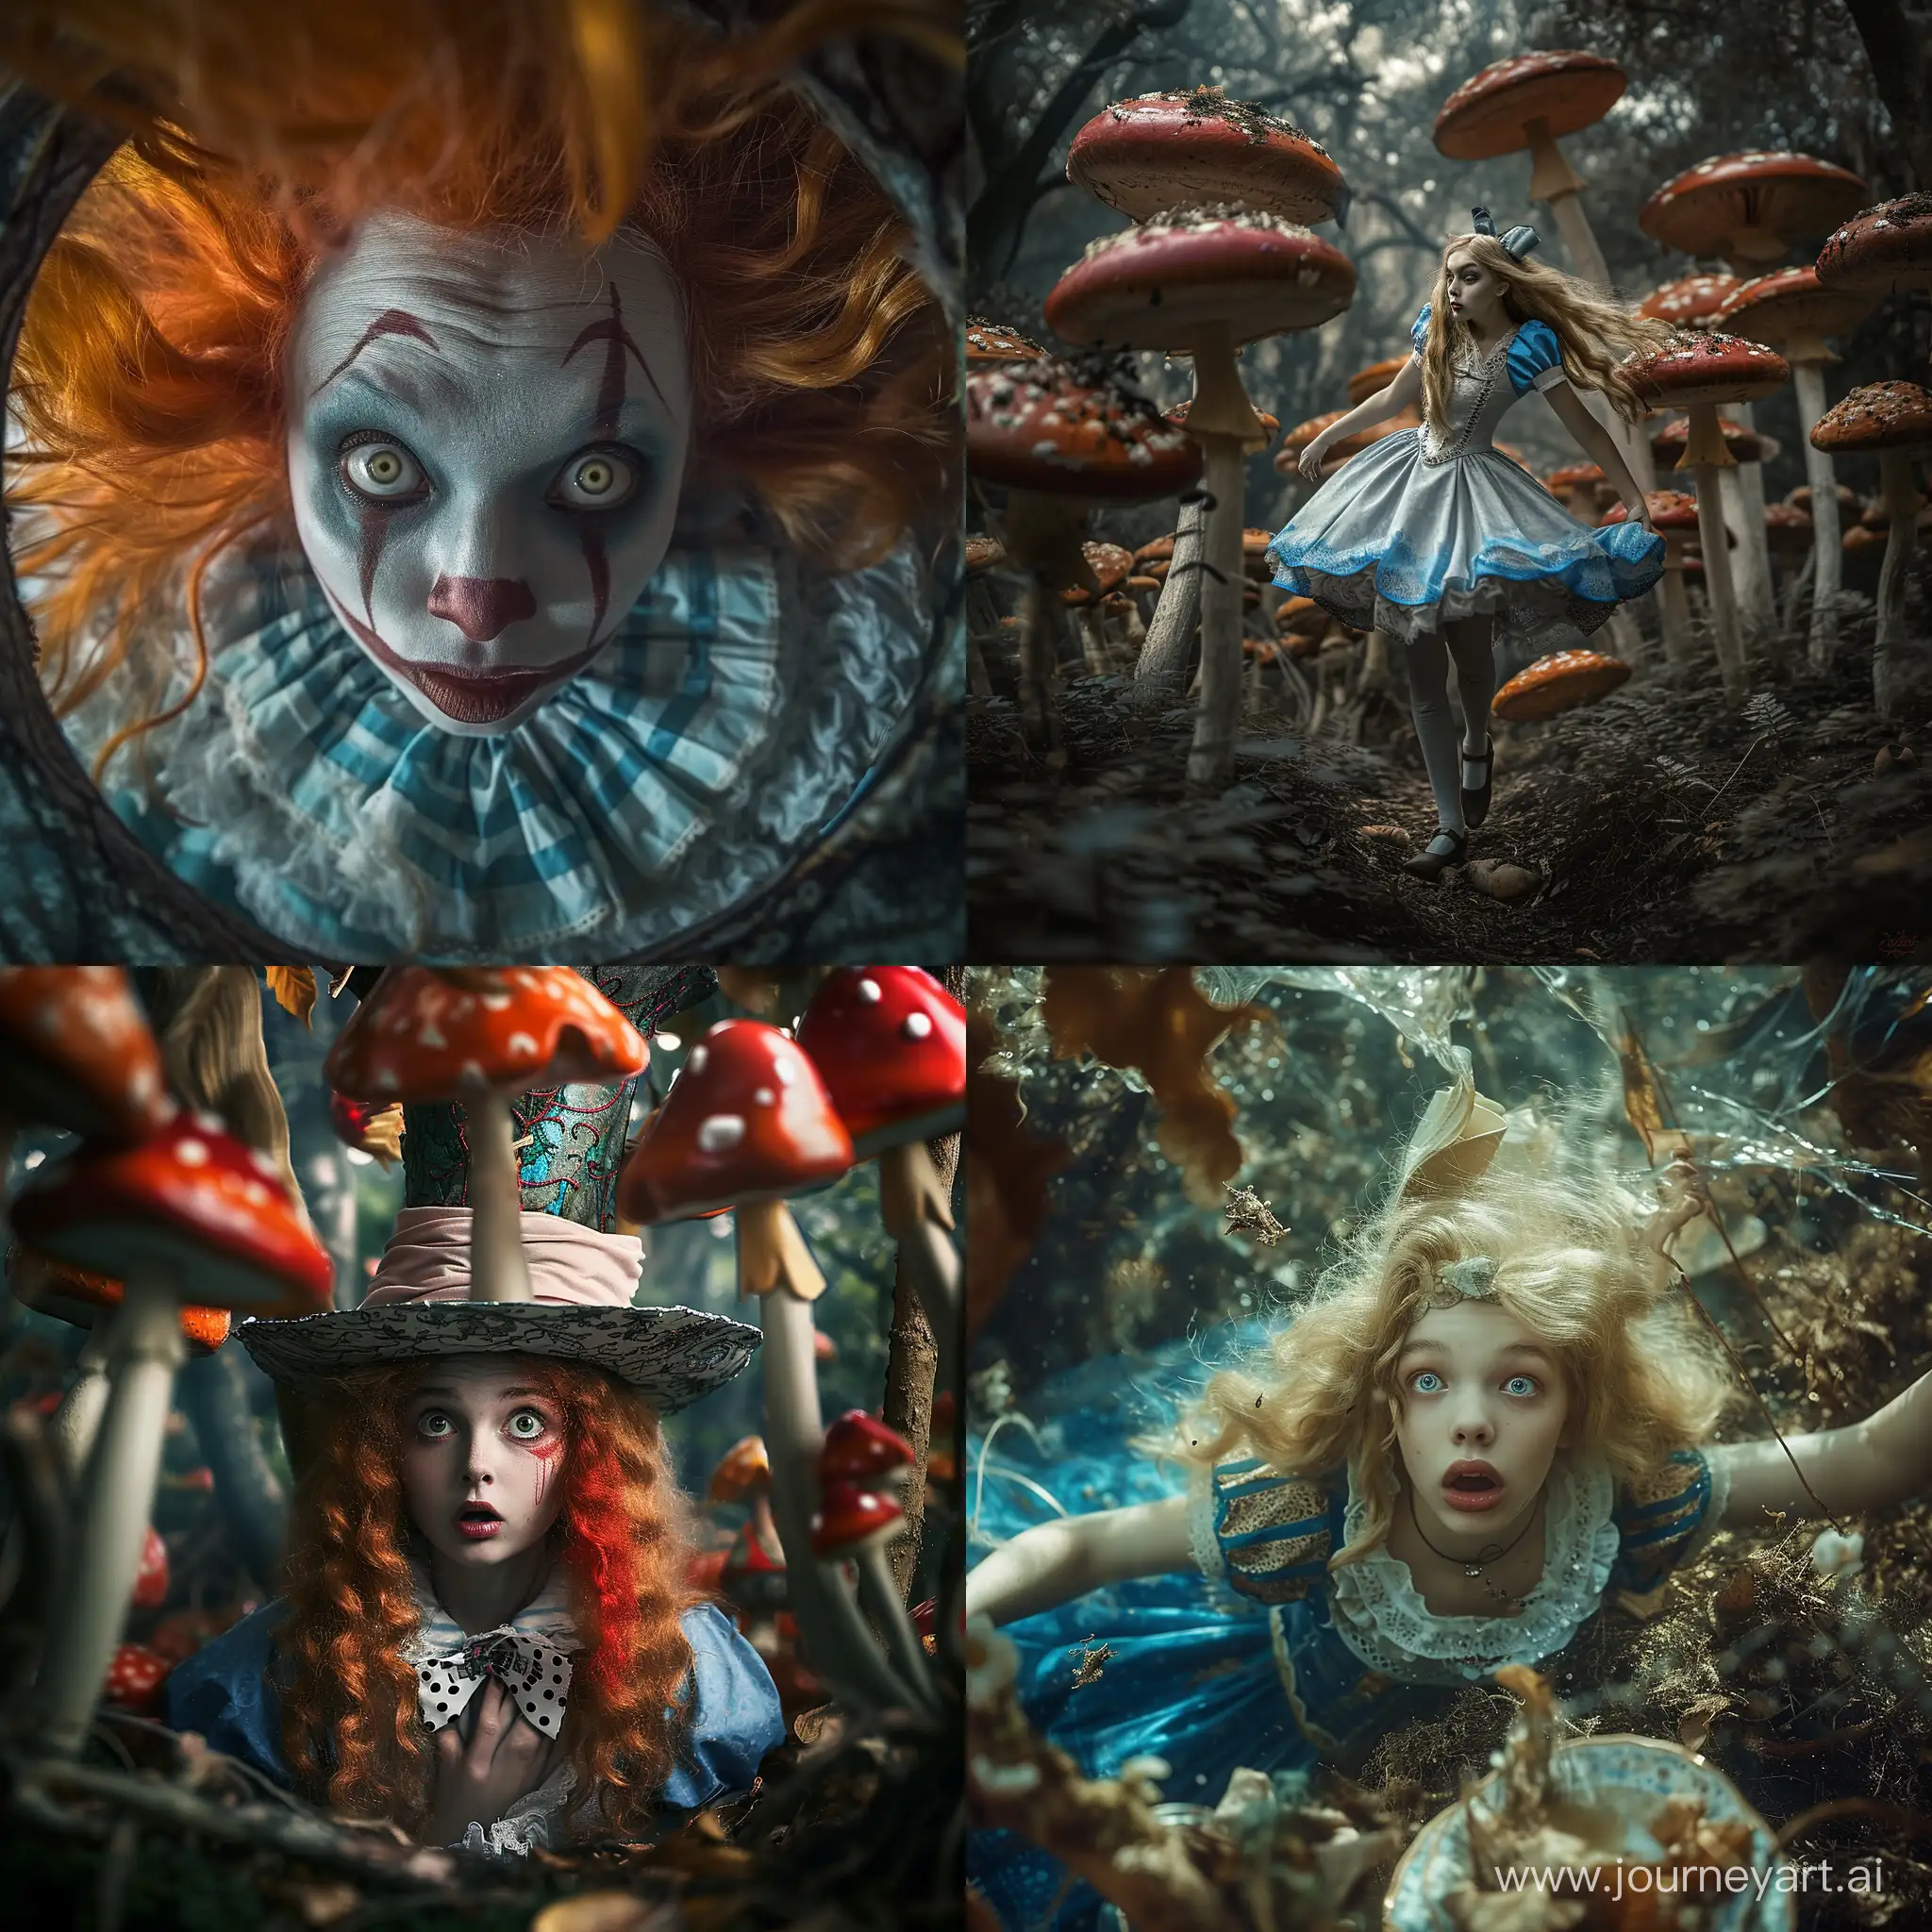 Unhinged-Wonderland-Expressive-Psychotic-Action-Shots-with-Experimental-Techniques